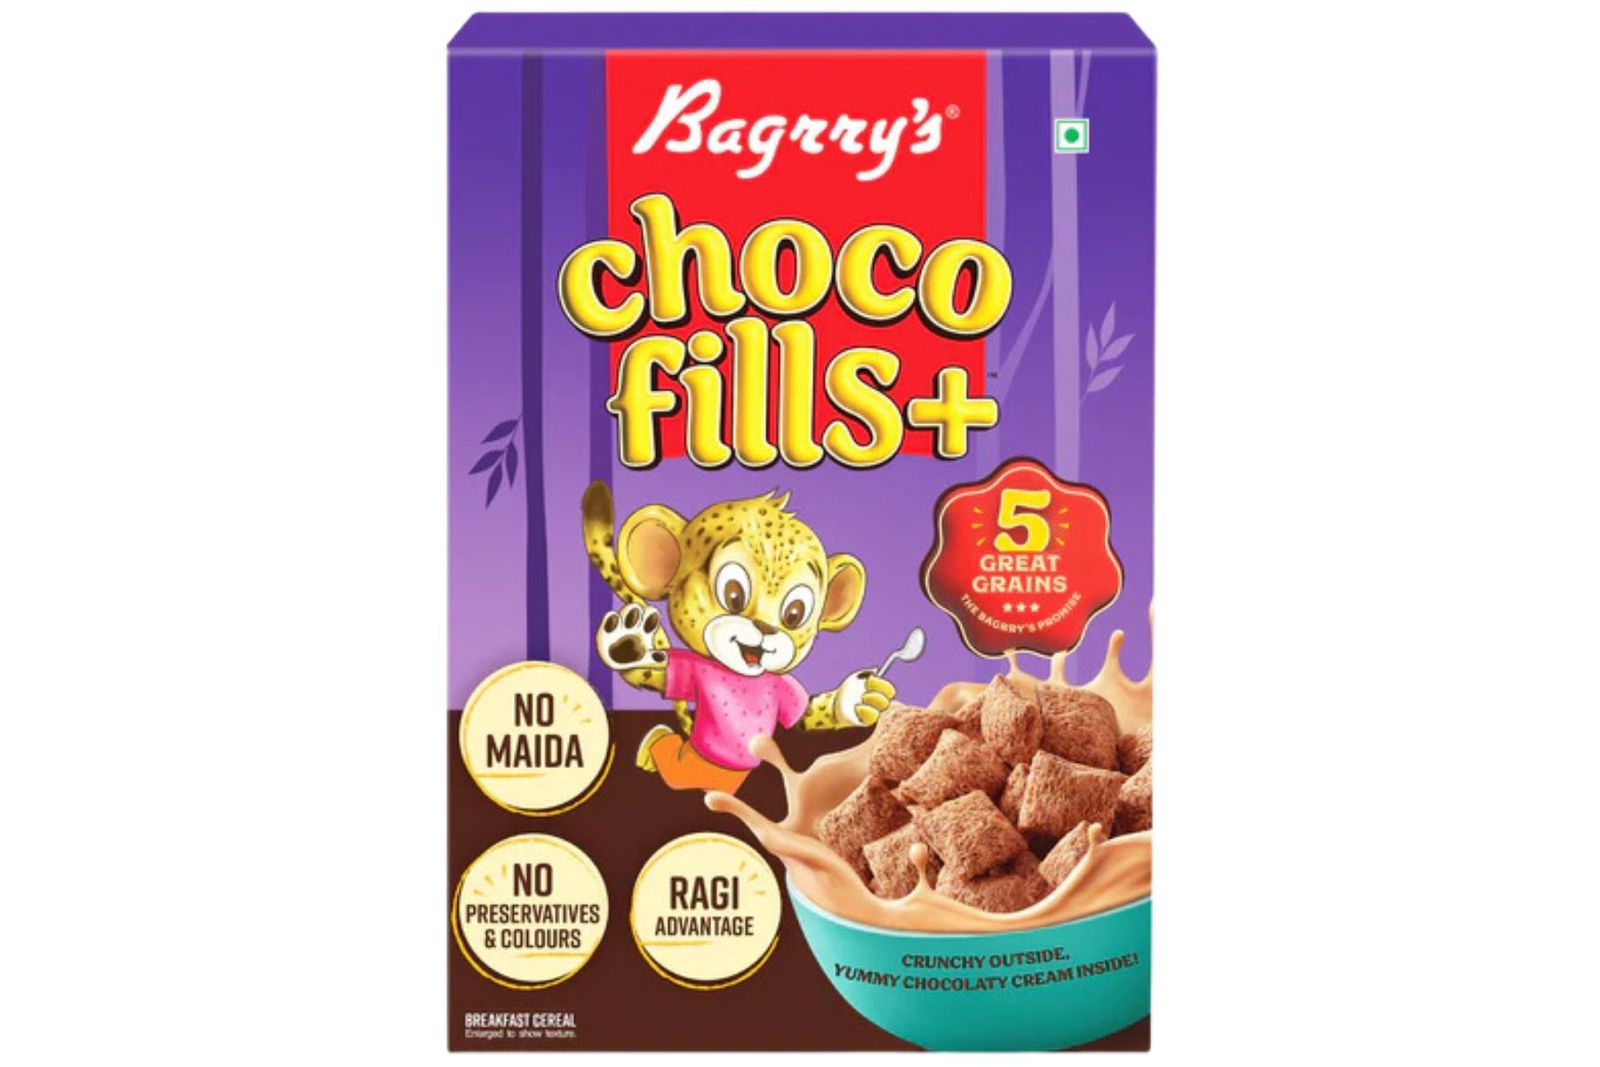 Bagrry's Choco Fill ( More Chocolately Inside)